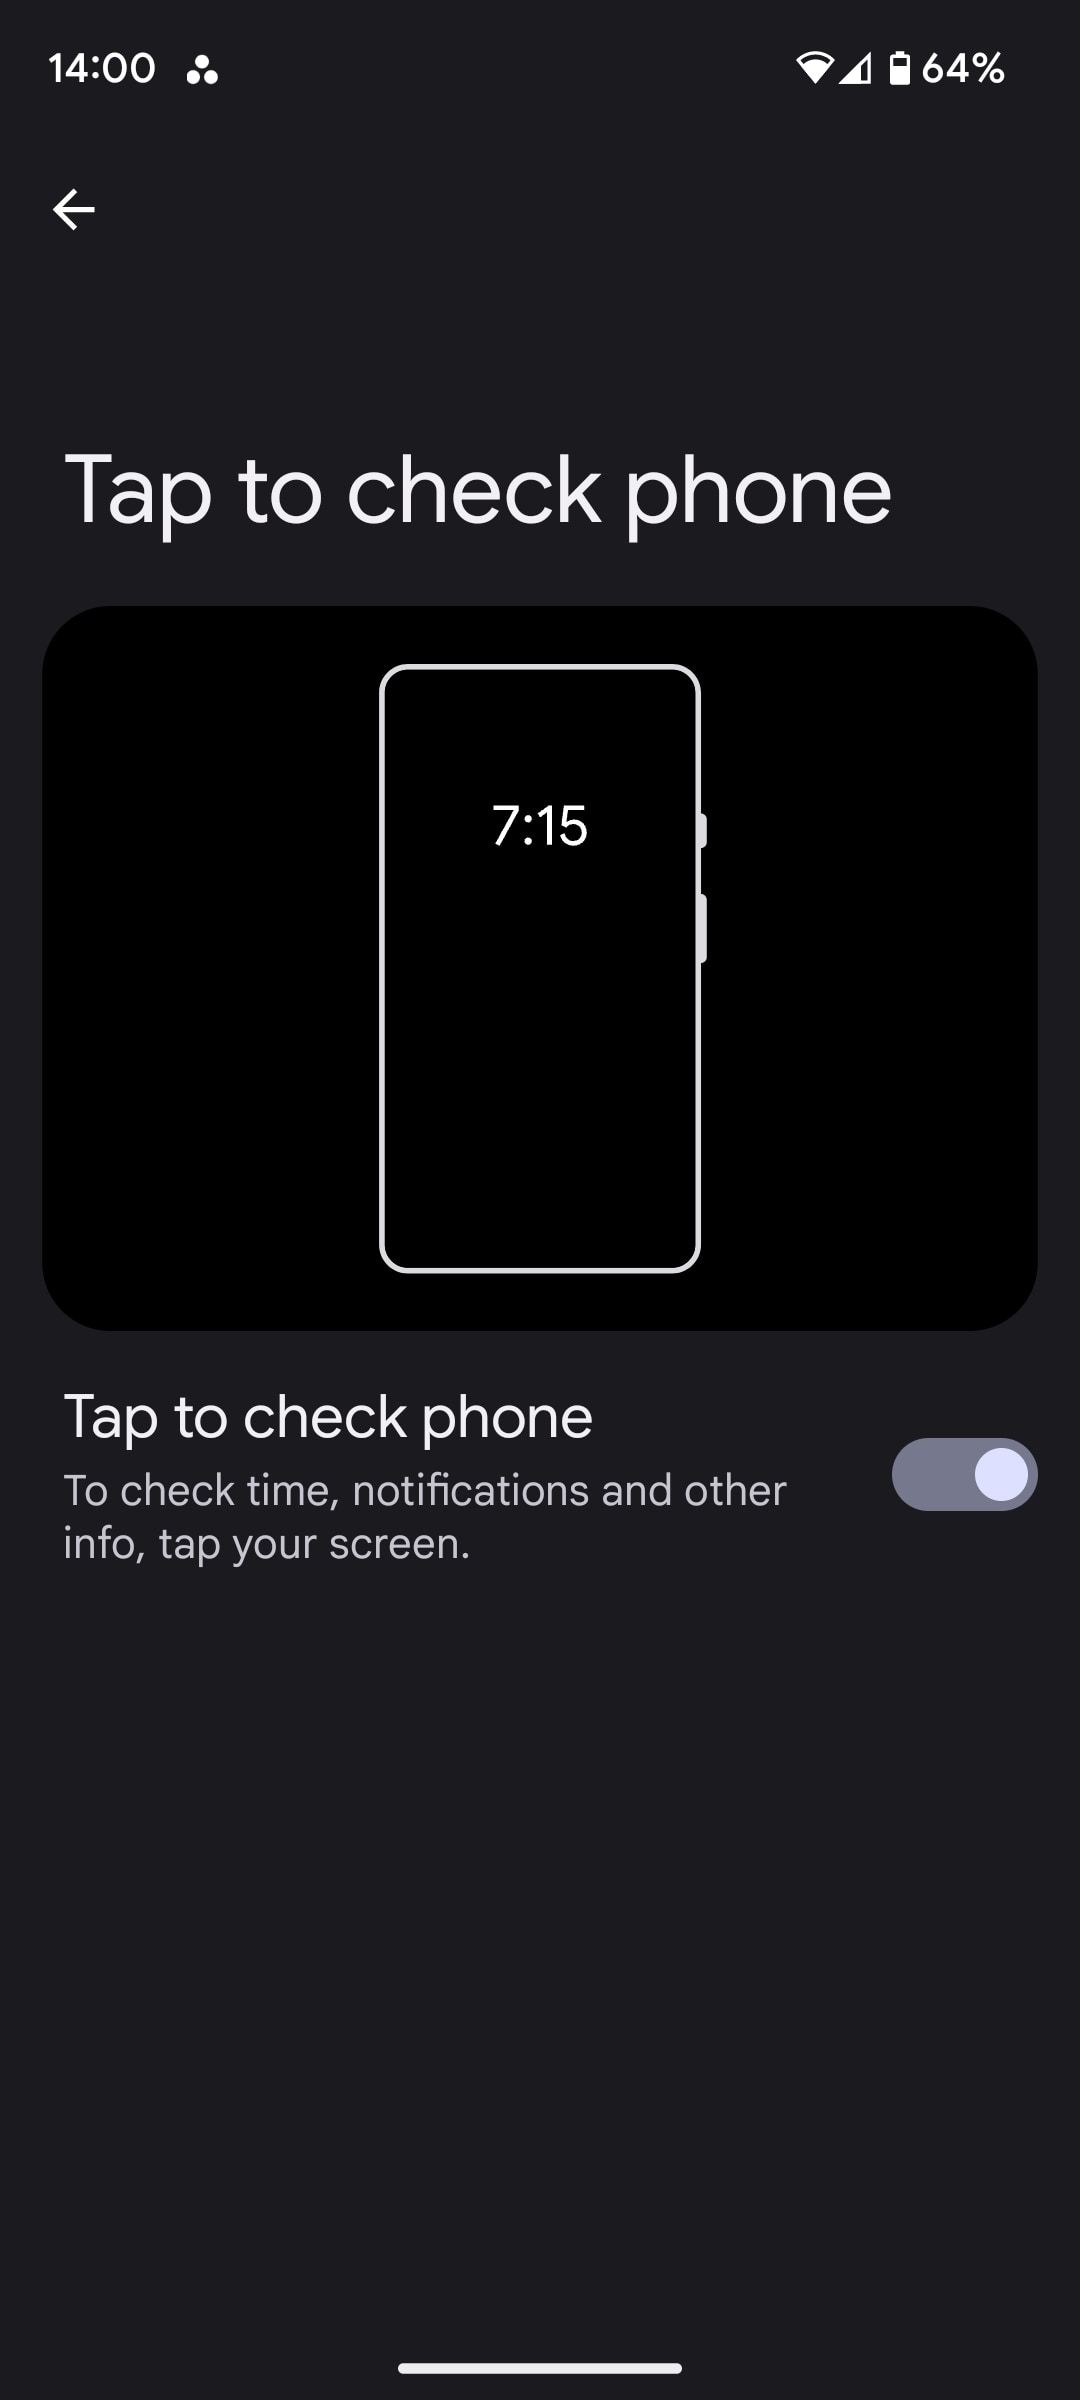 tap to check phone pixel